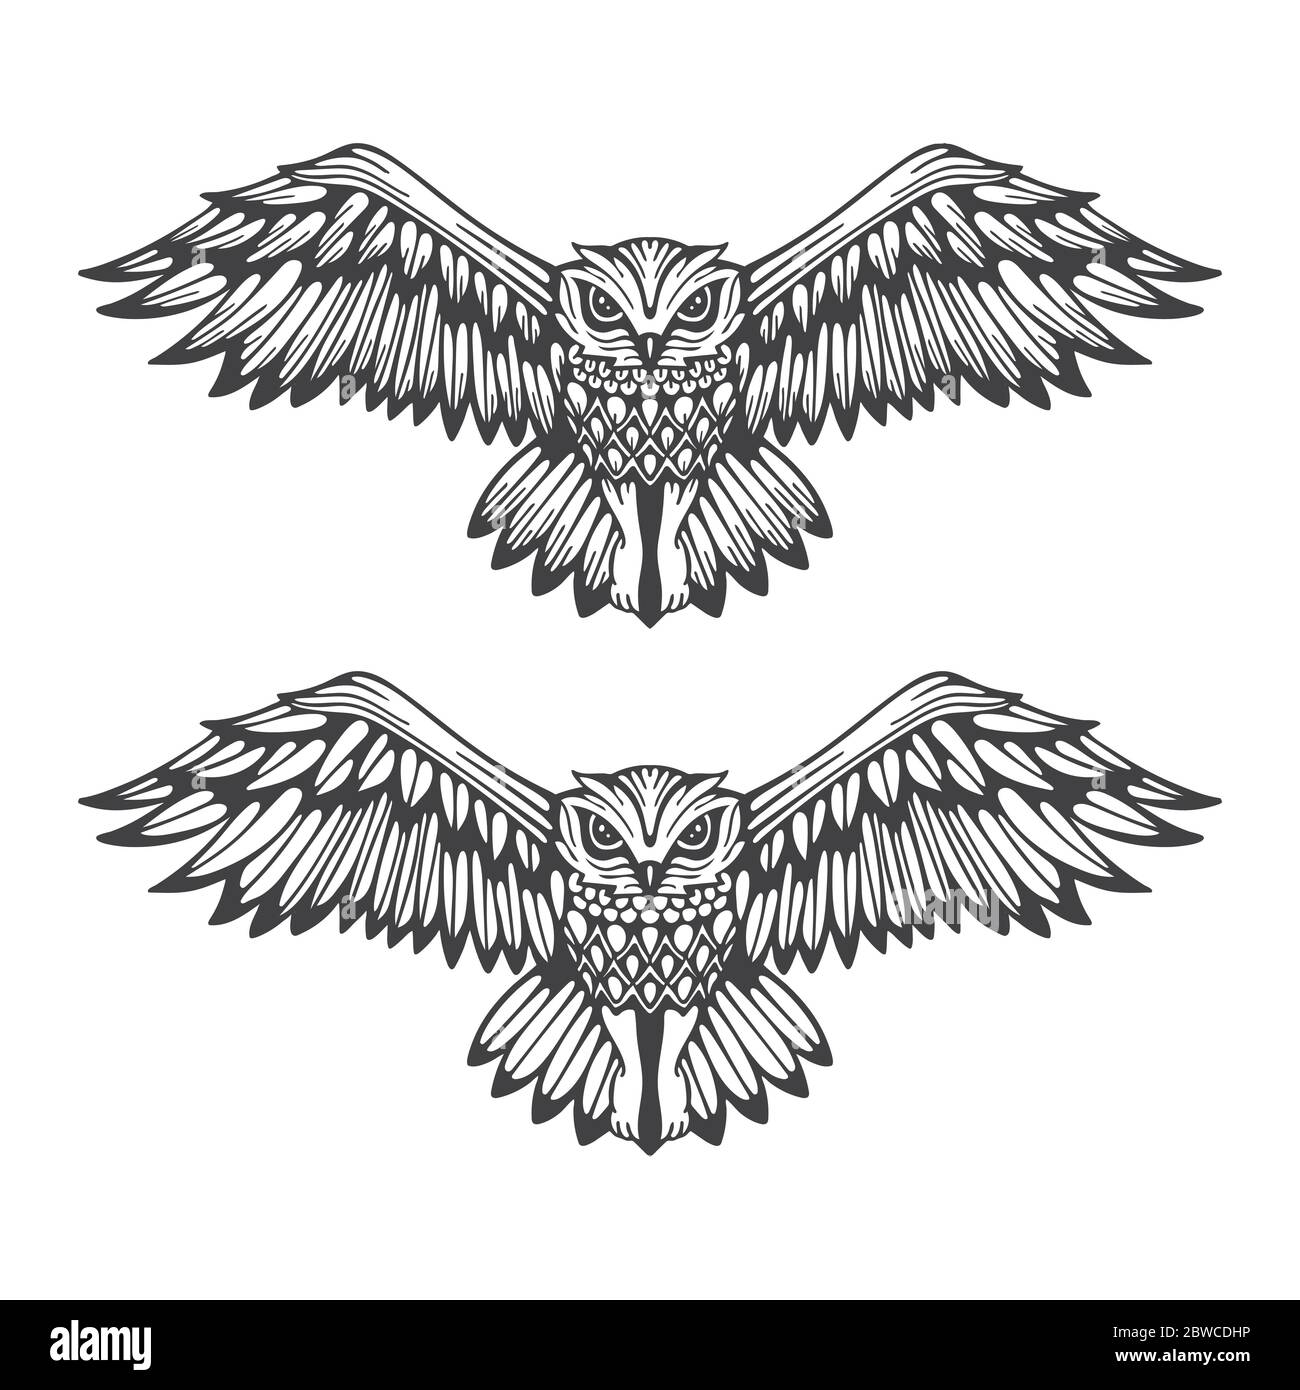 Owl. Flaying owl hand drawn vector illustration. Owl attack sketch drawing. Part of set. Stock Vector